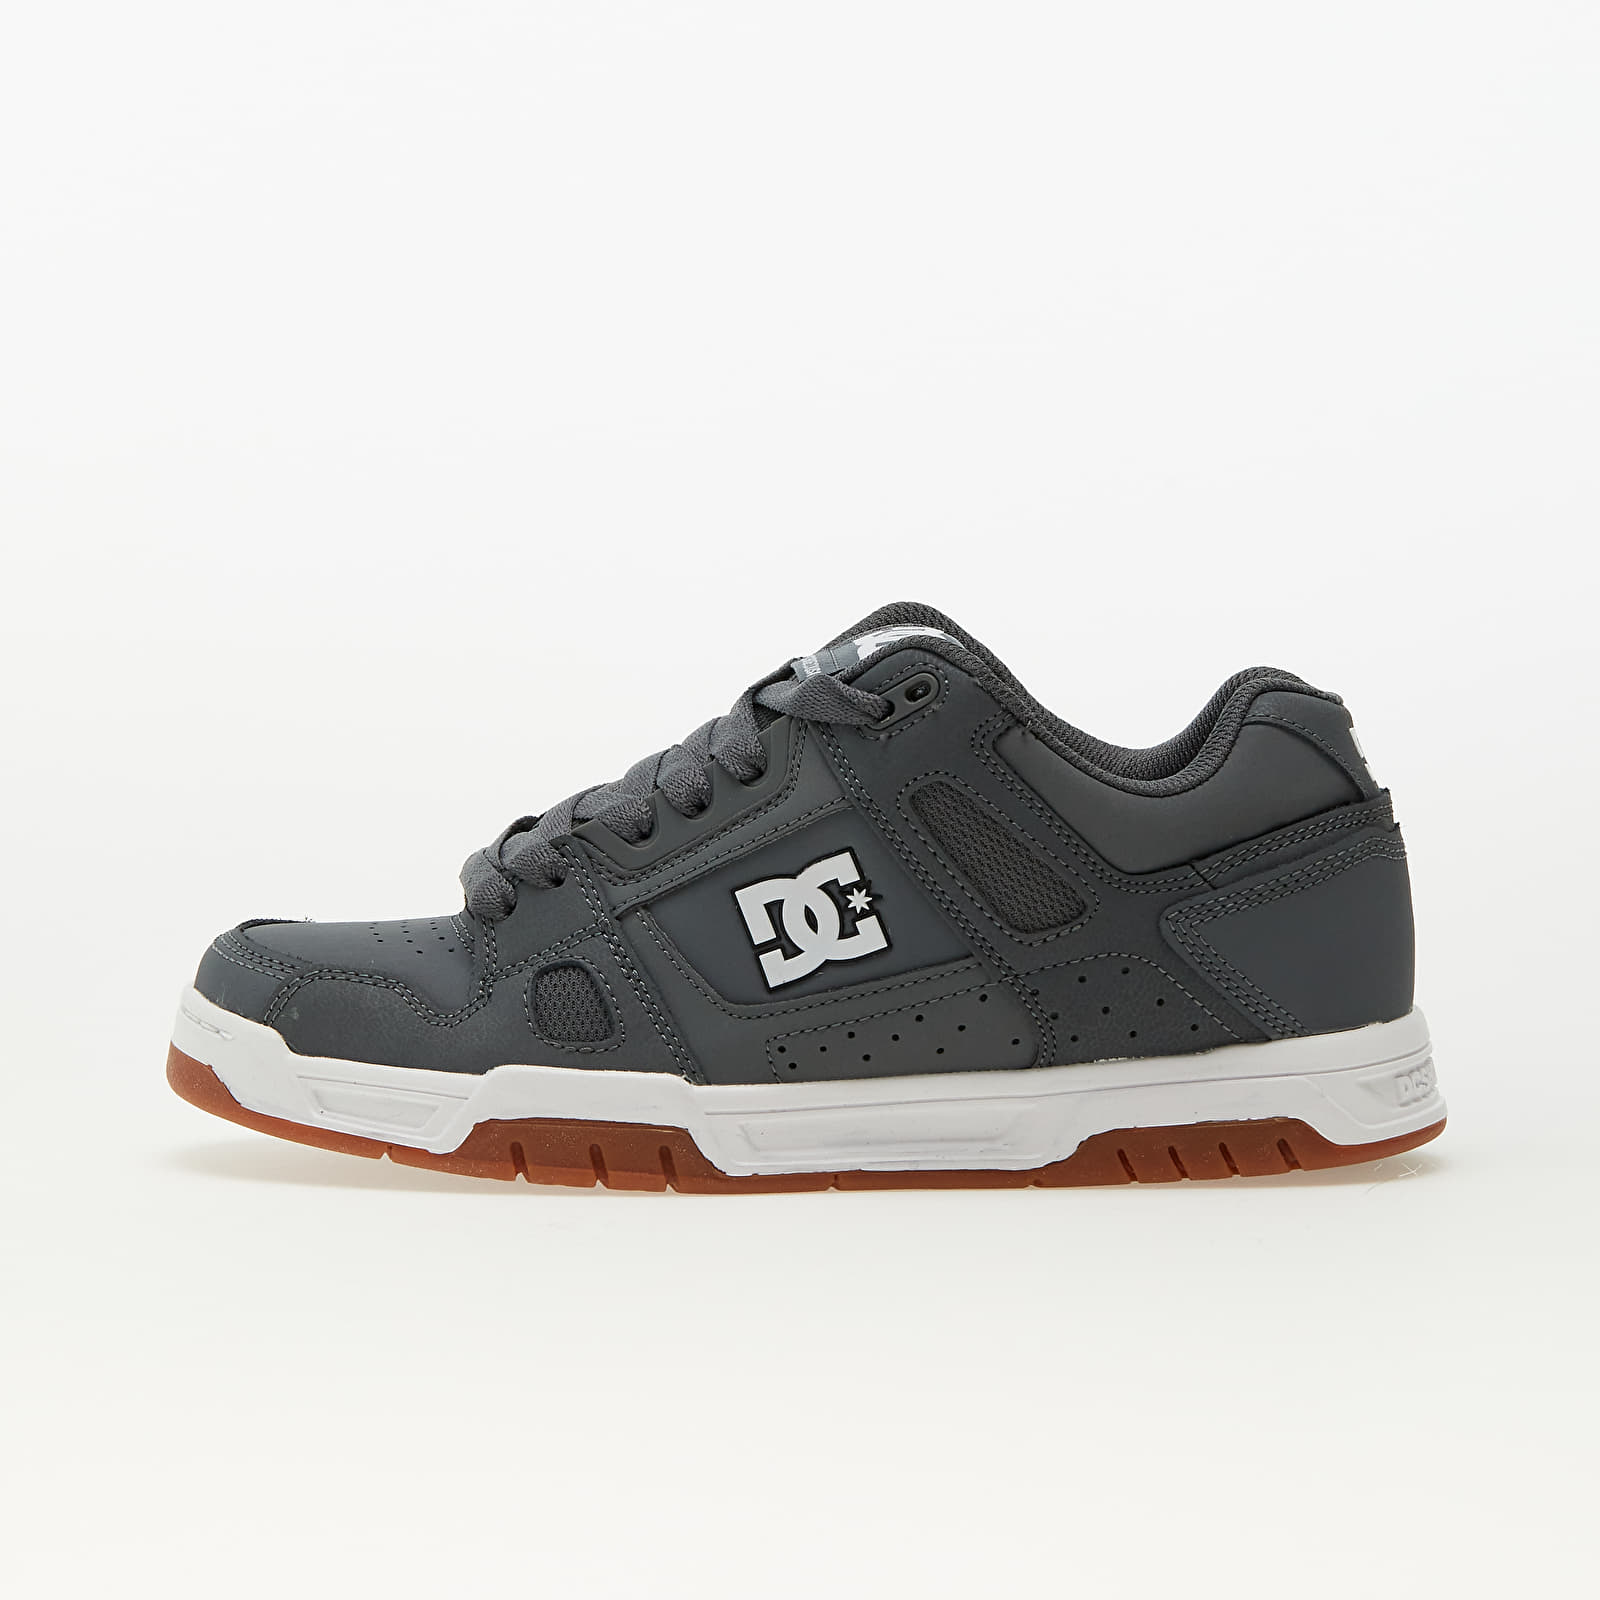 Men's sneakers and shoes DC Stag Grey/ Gum